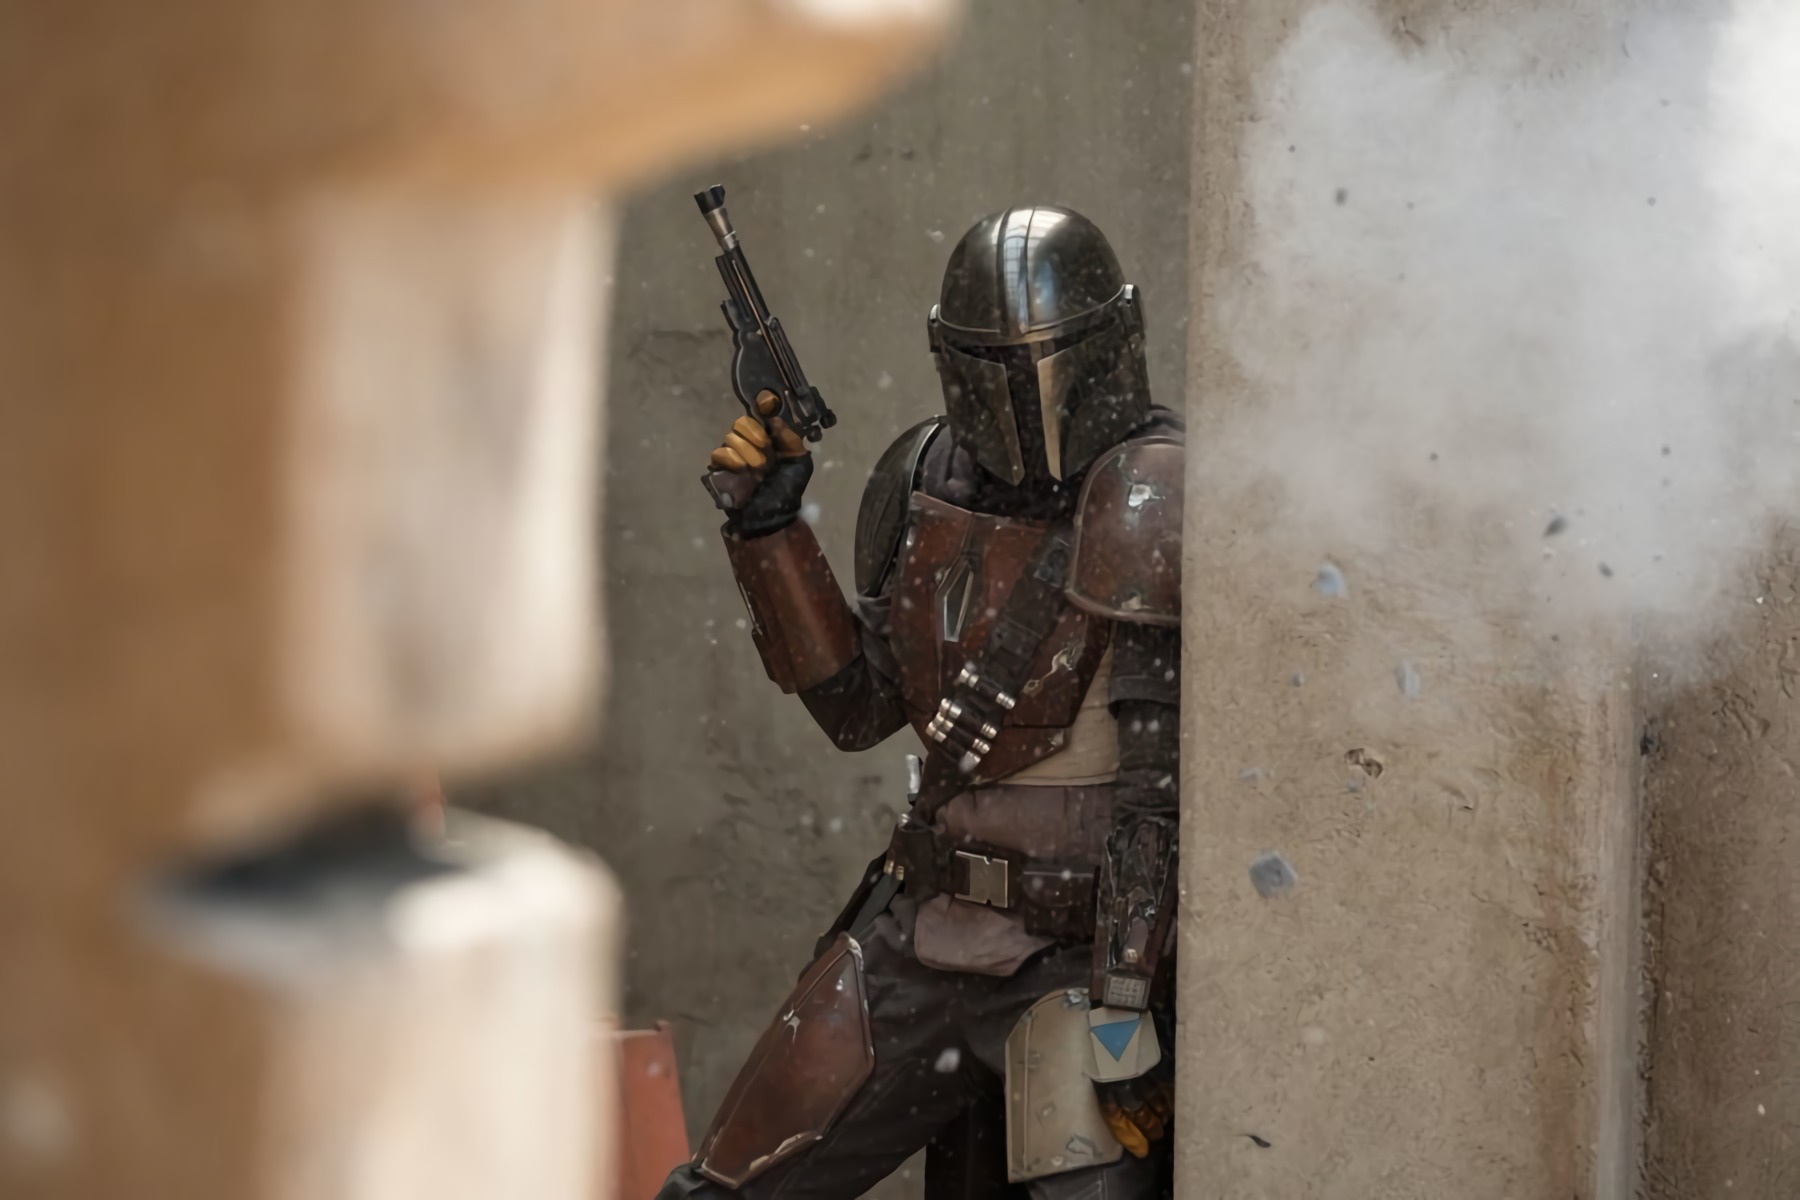 Official 'The Mandalorian' logo and new photos/teaser from the Disney+ series revealed